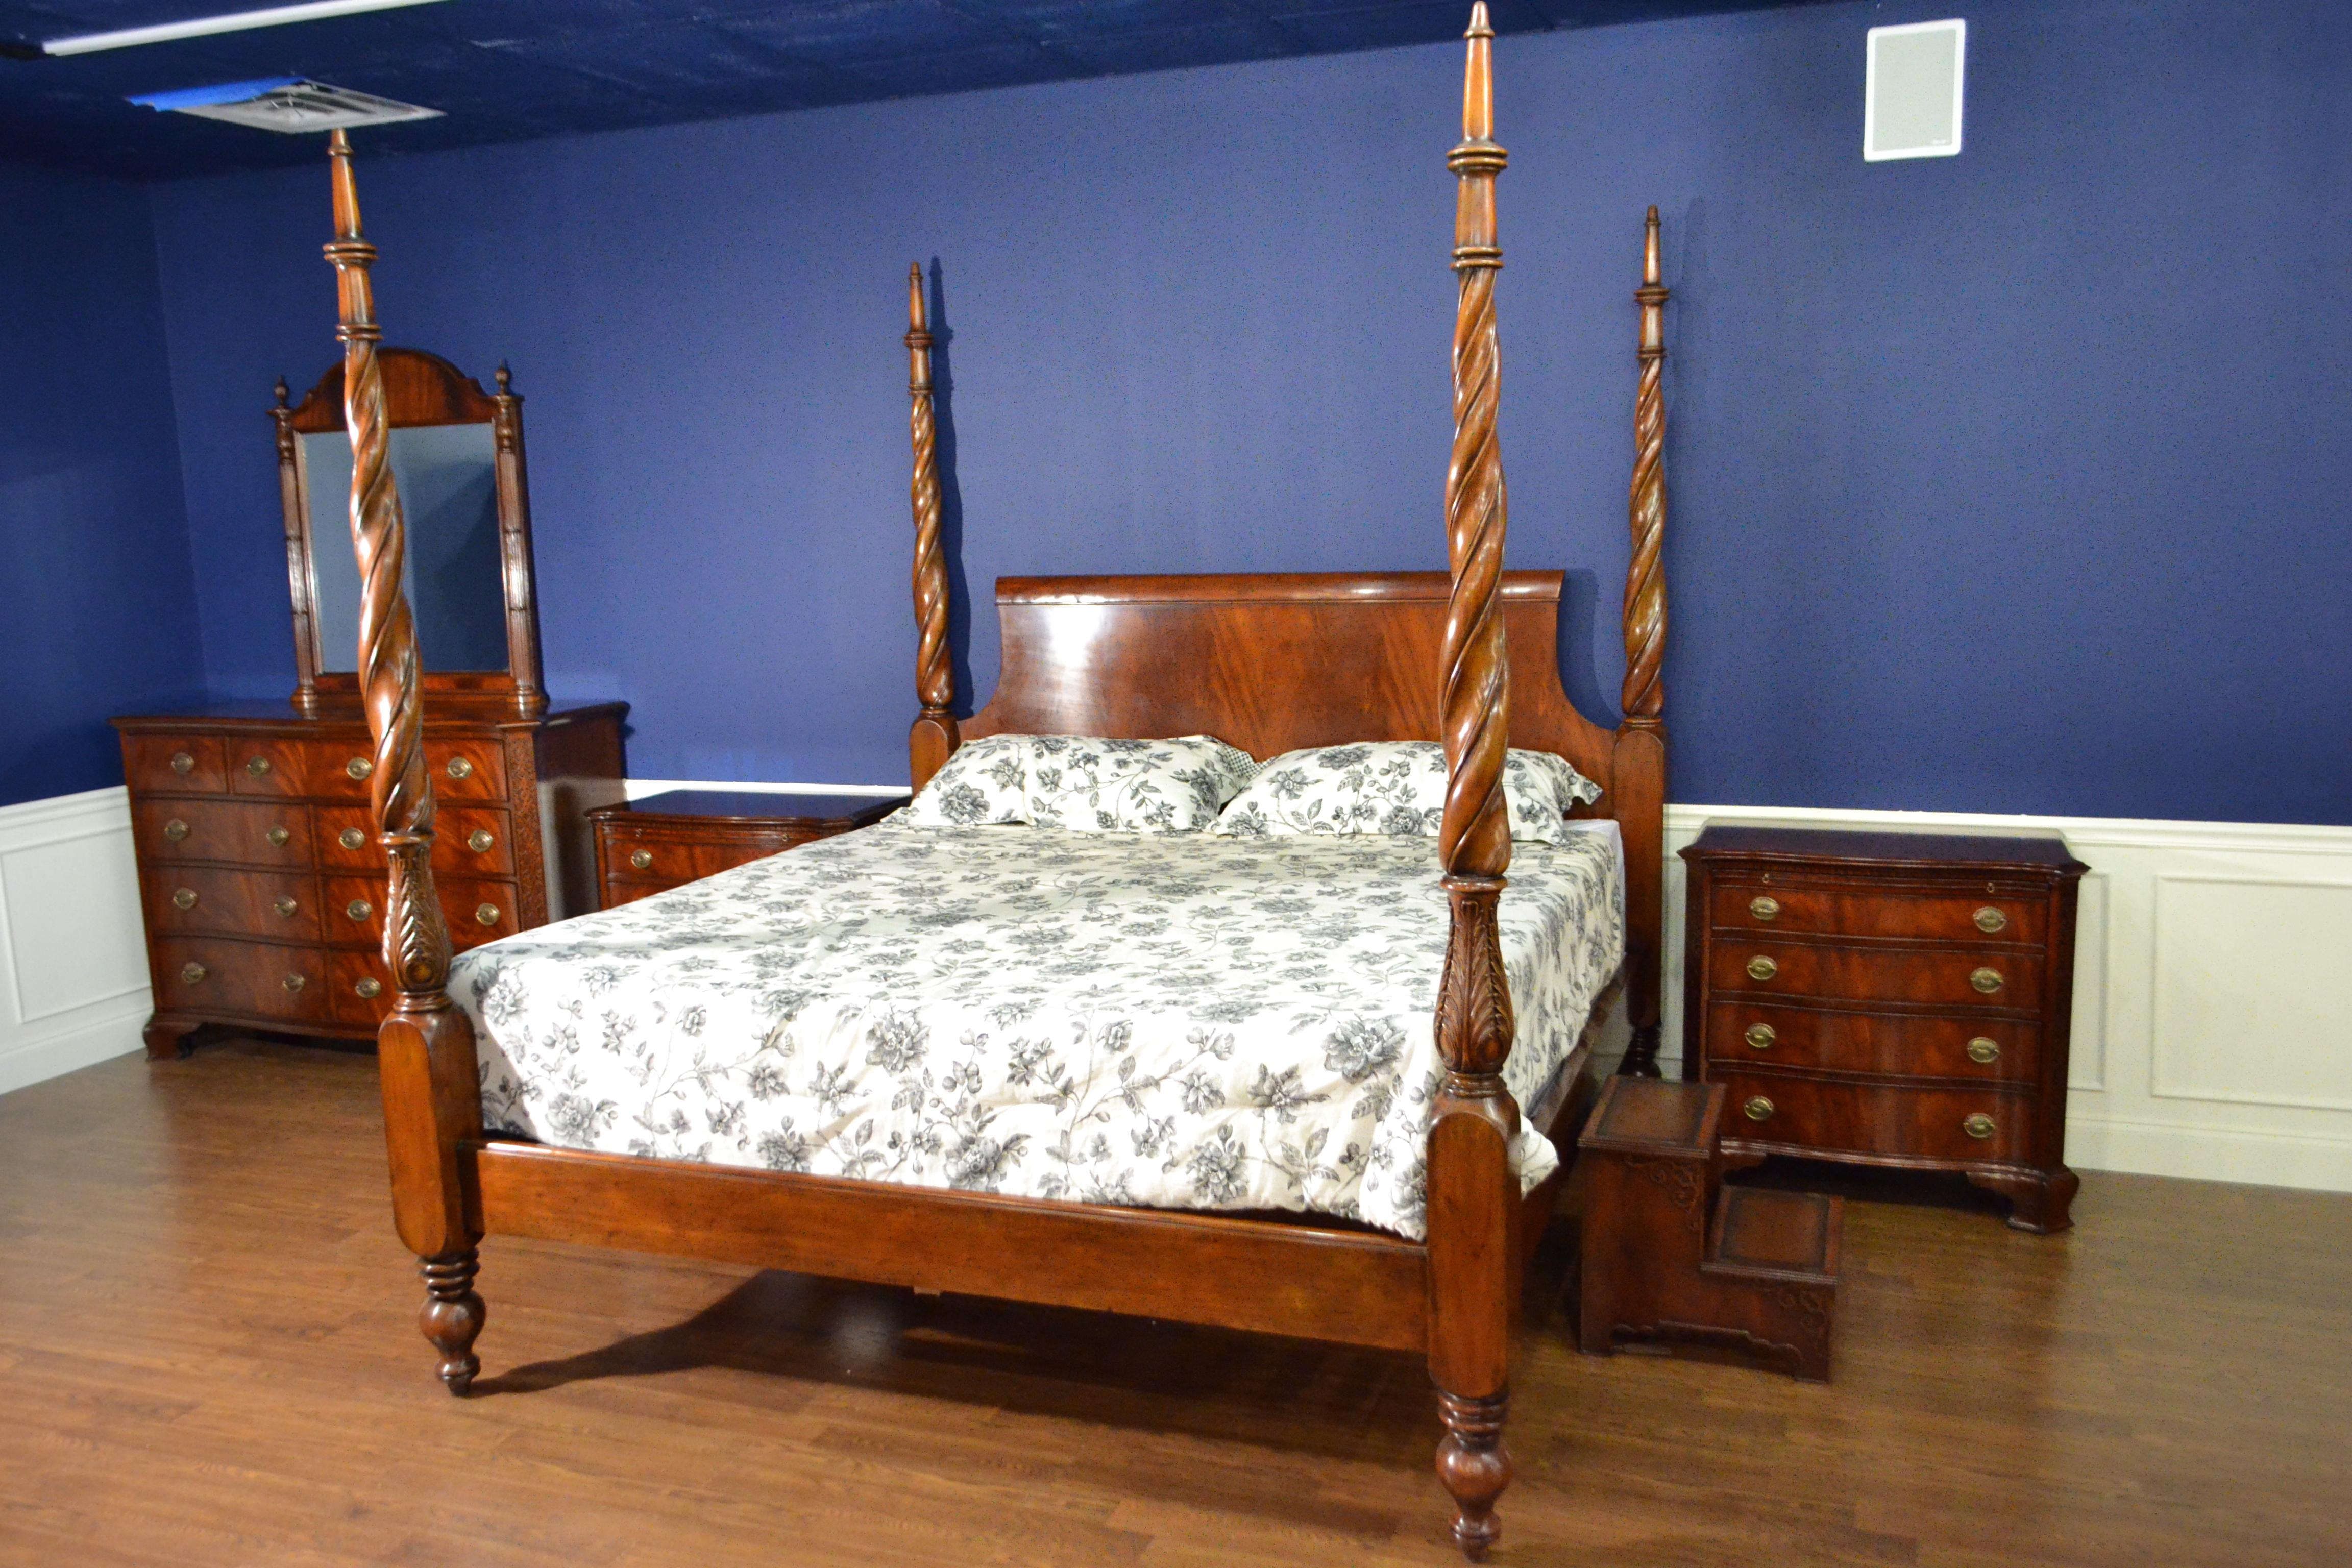 This is a new traditional king size mahogany Plantation poster bed by Leighton Hall Furniture. It’s design was inspired by Caribbean poster beds from the Regency period and features hand carved posts and a crotch mahogany headboard.

Approximate